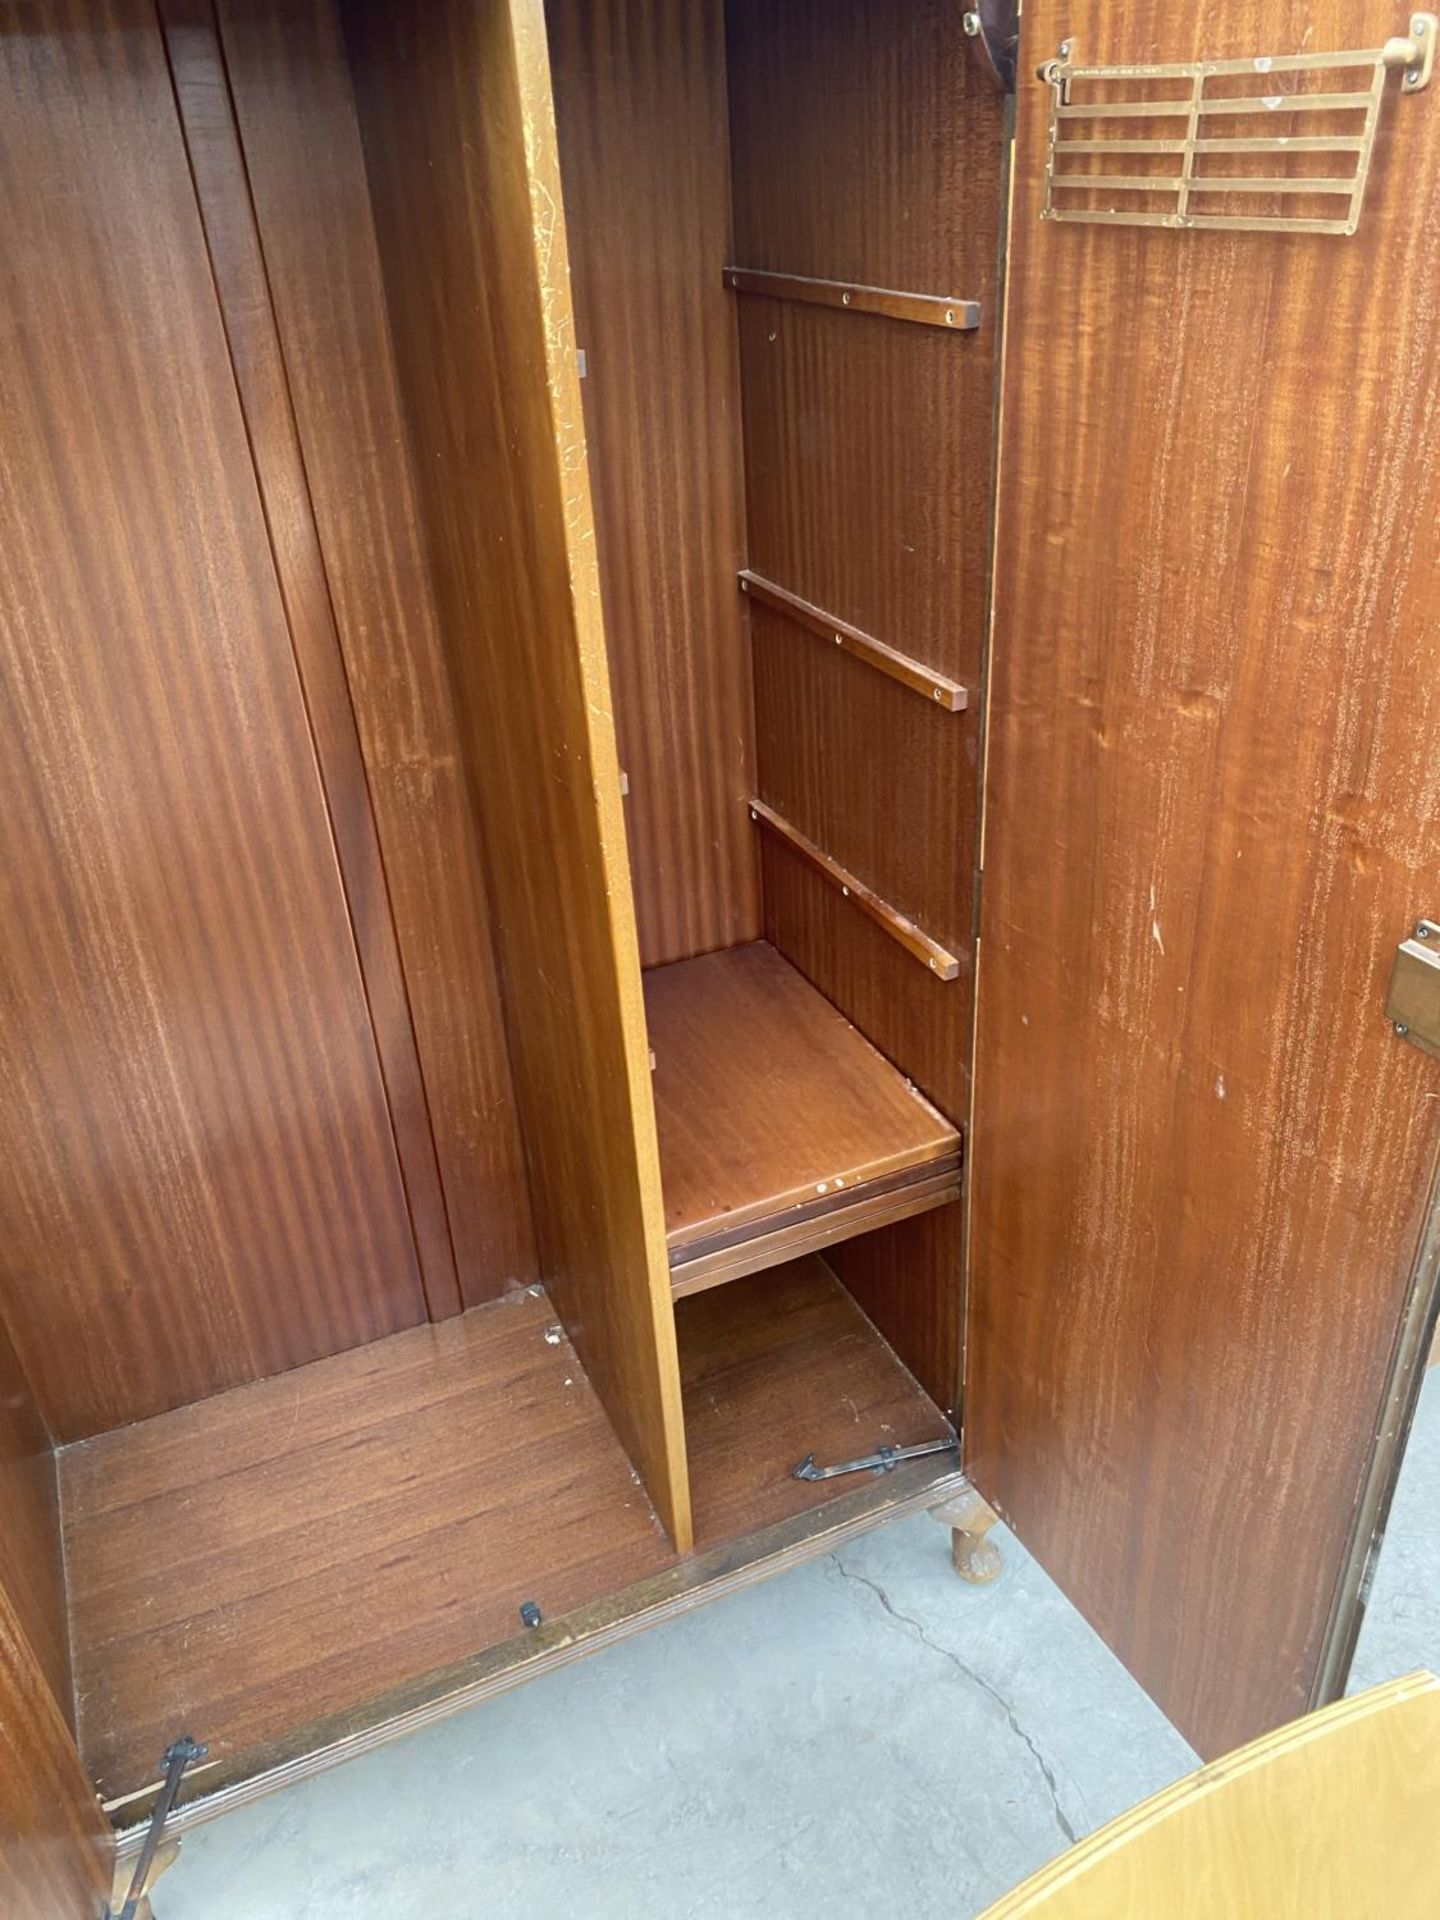 A WALNUT WARDROBE WITH TWO DOORS - Image 3 of 3